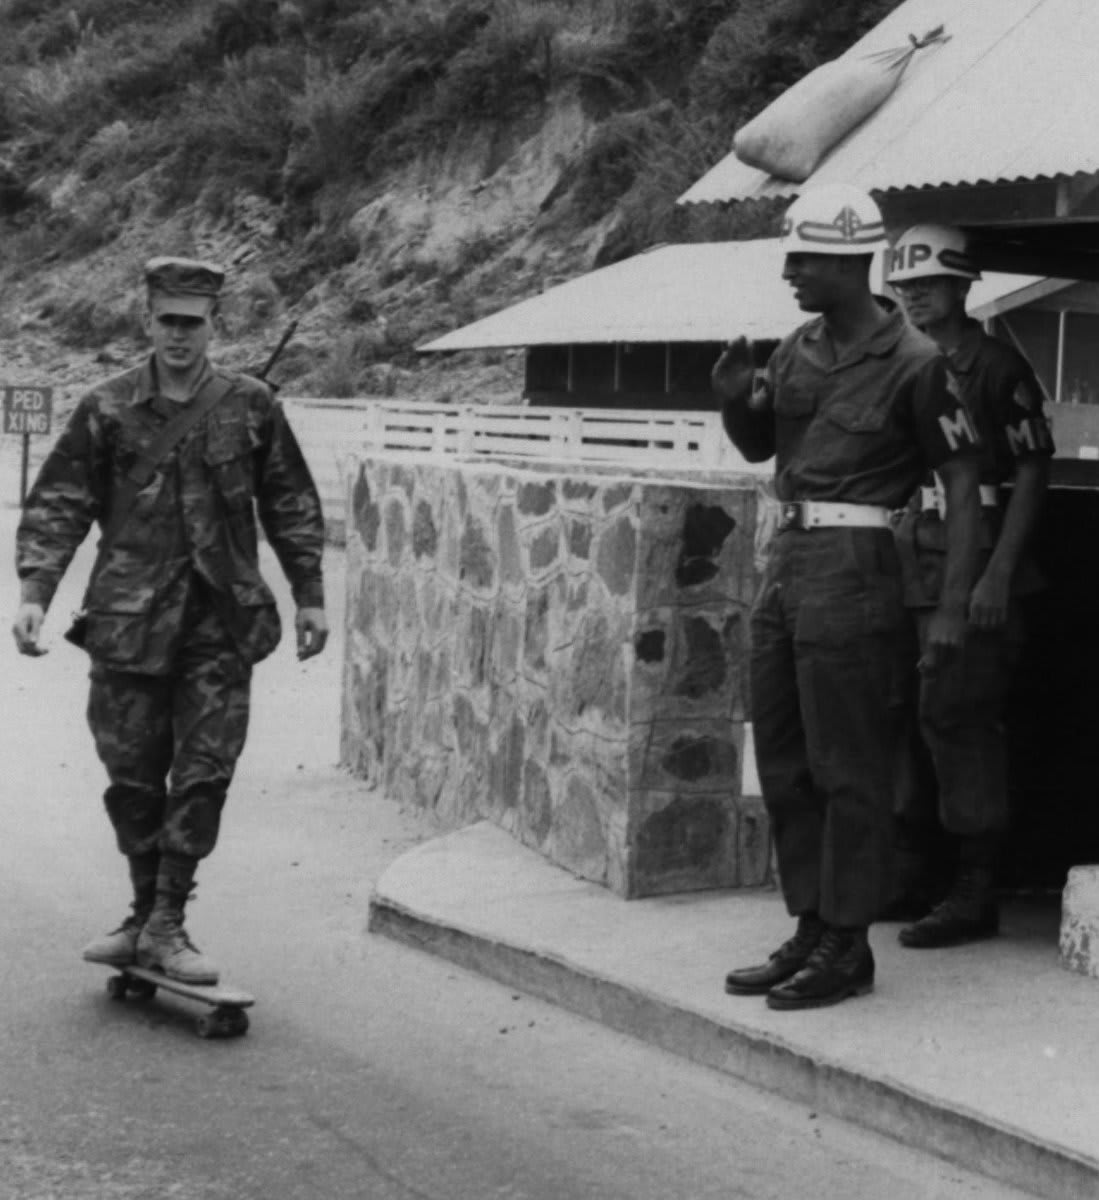 “SKATE ME TO THE WAR ON TIME,” 50 years ago OTD https://t.co/r36FMeoptb Remembering Vietnam